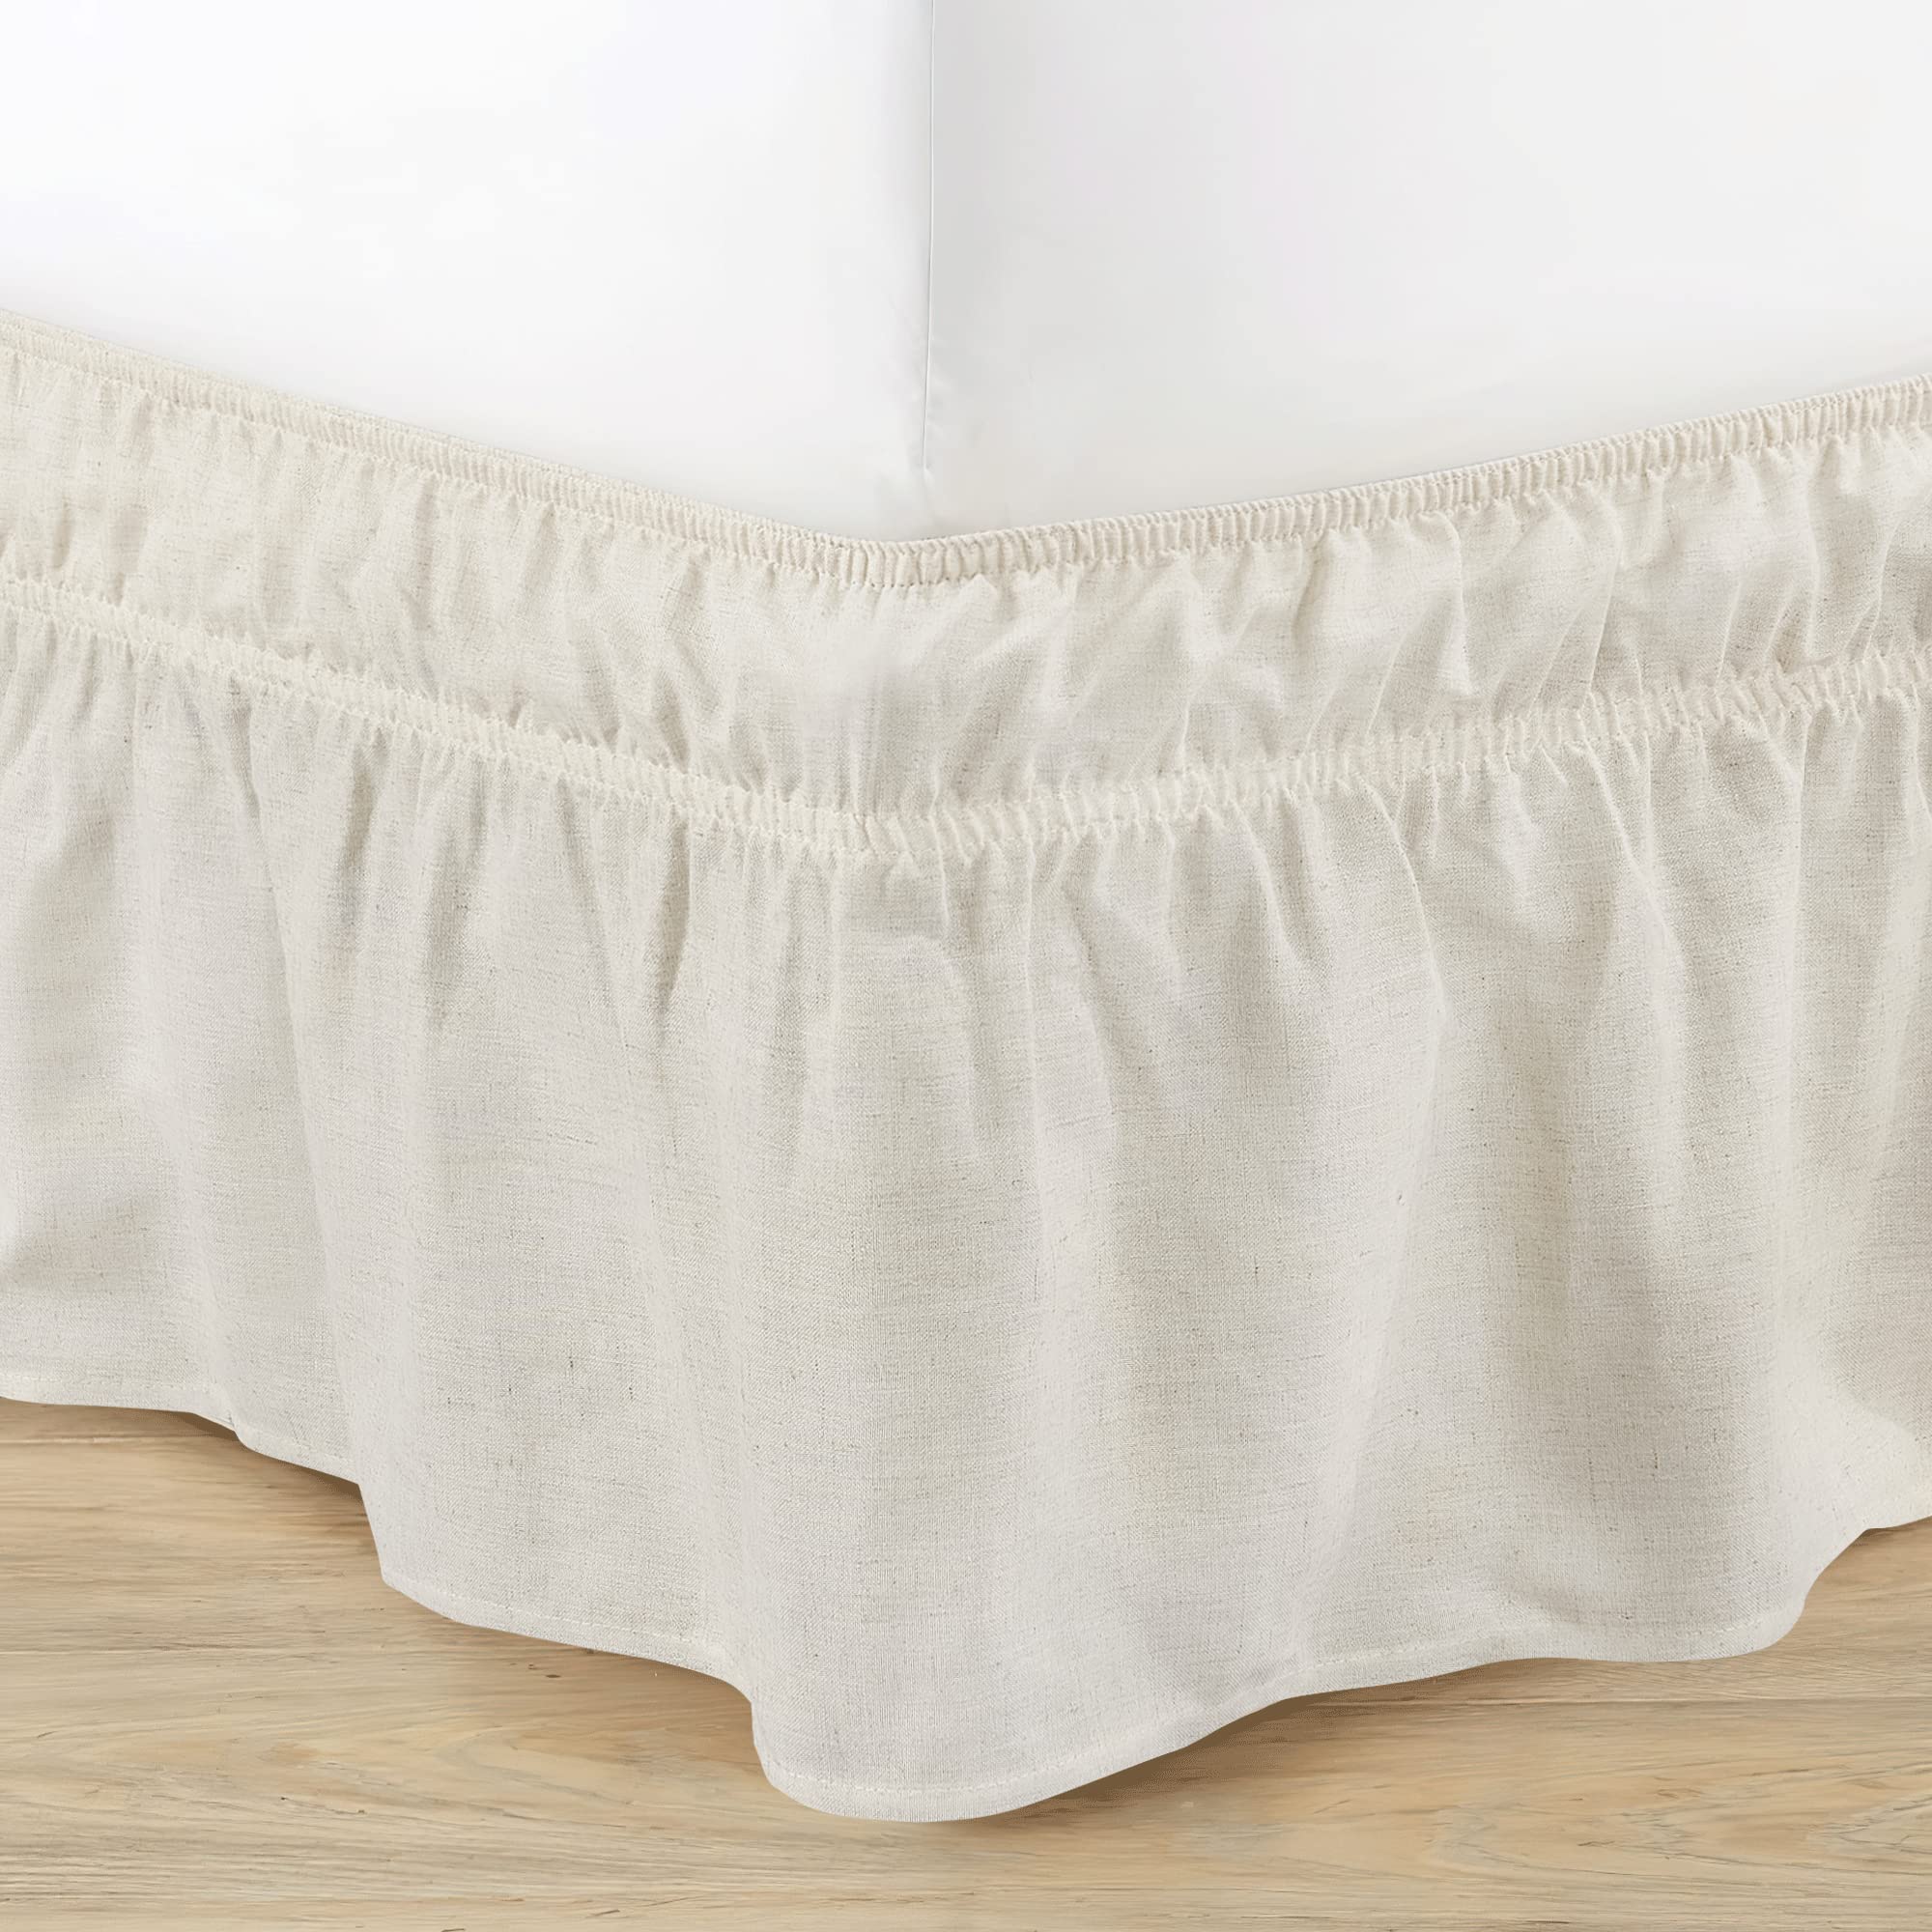 1PCS Adjustable Scalable Elastic Wrap Around Bed Skirt